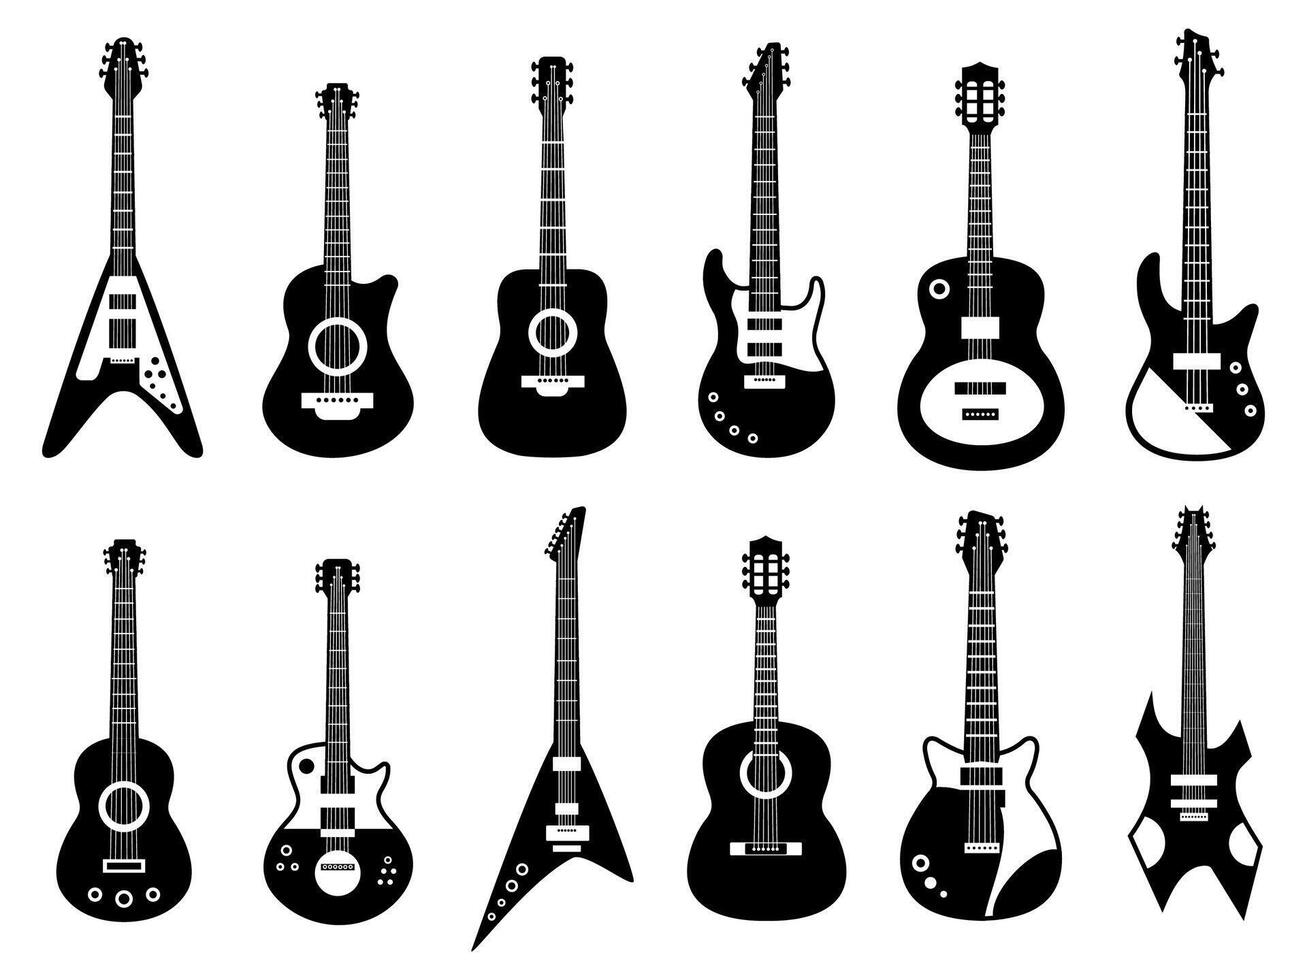 Guitars silhouette. Black electric and acoustic music instrument, rock jazz guitar silhouette, music band guitars vector illustration icons set